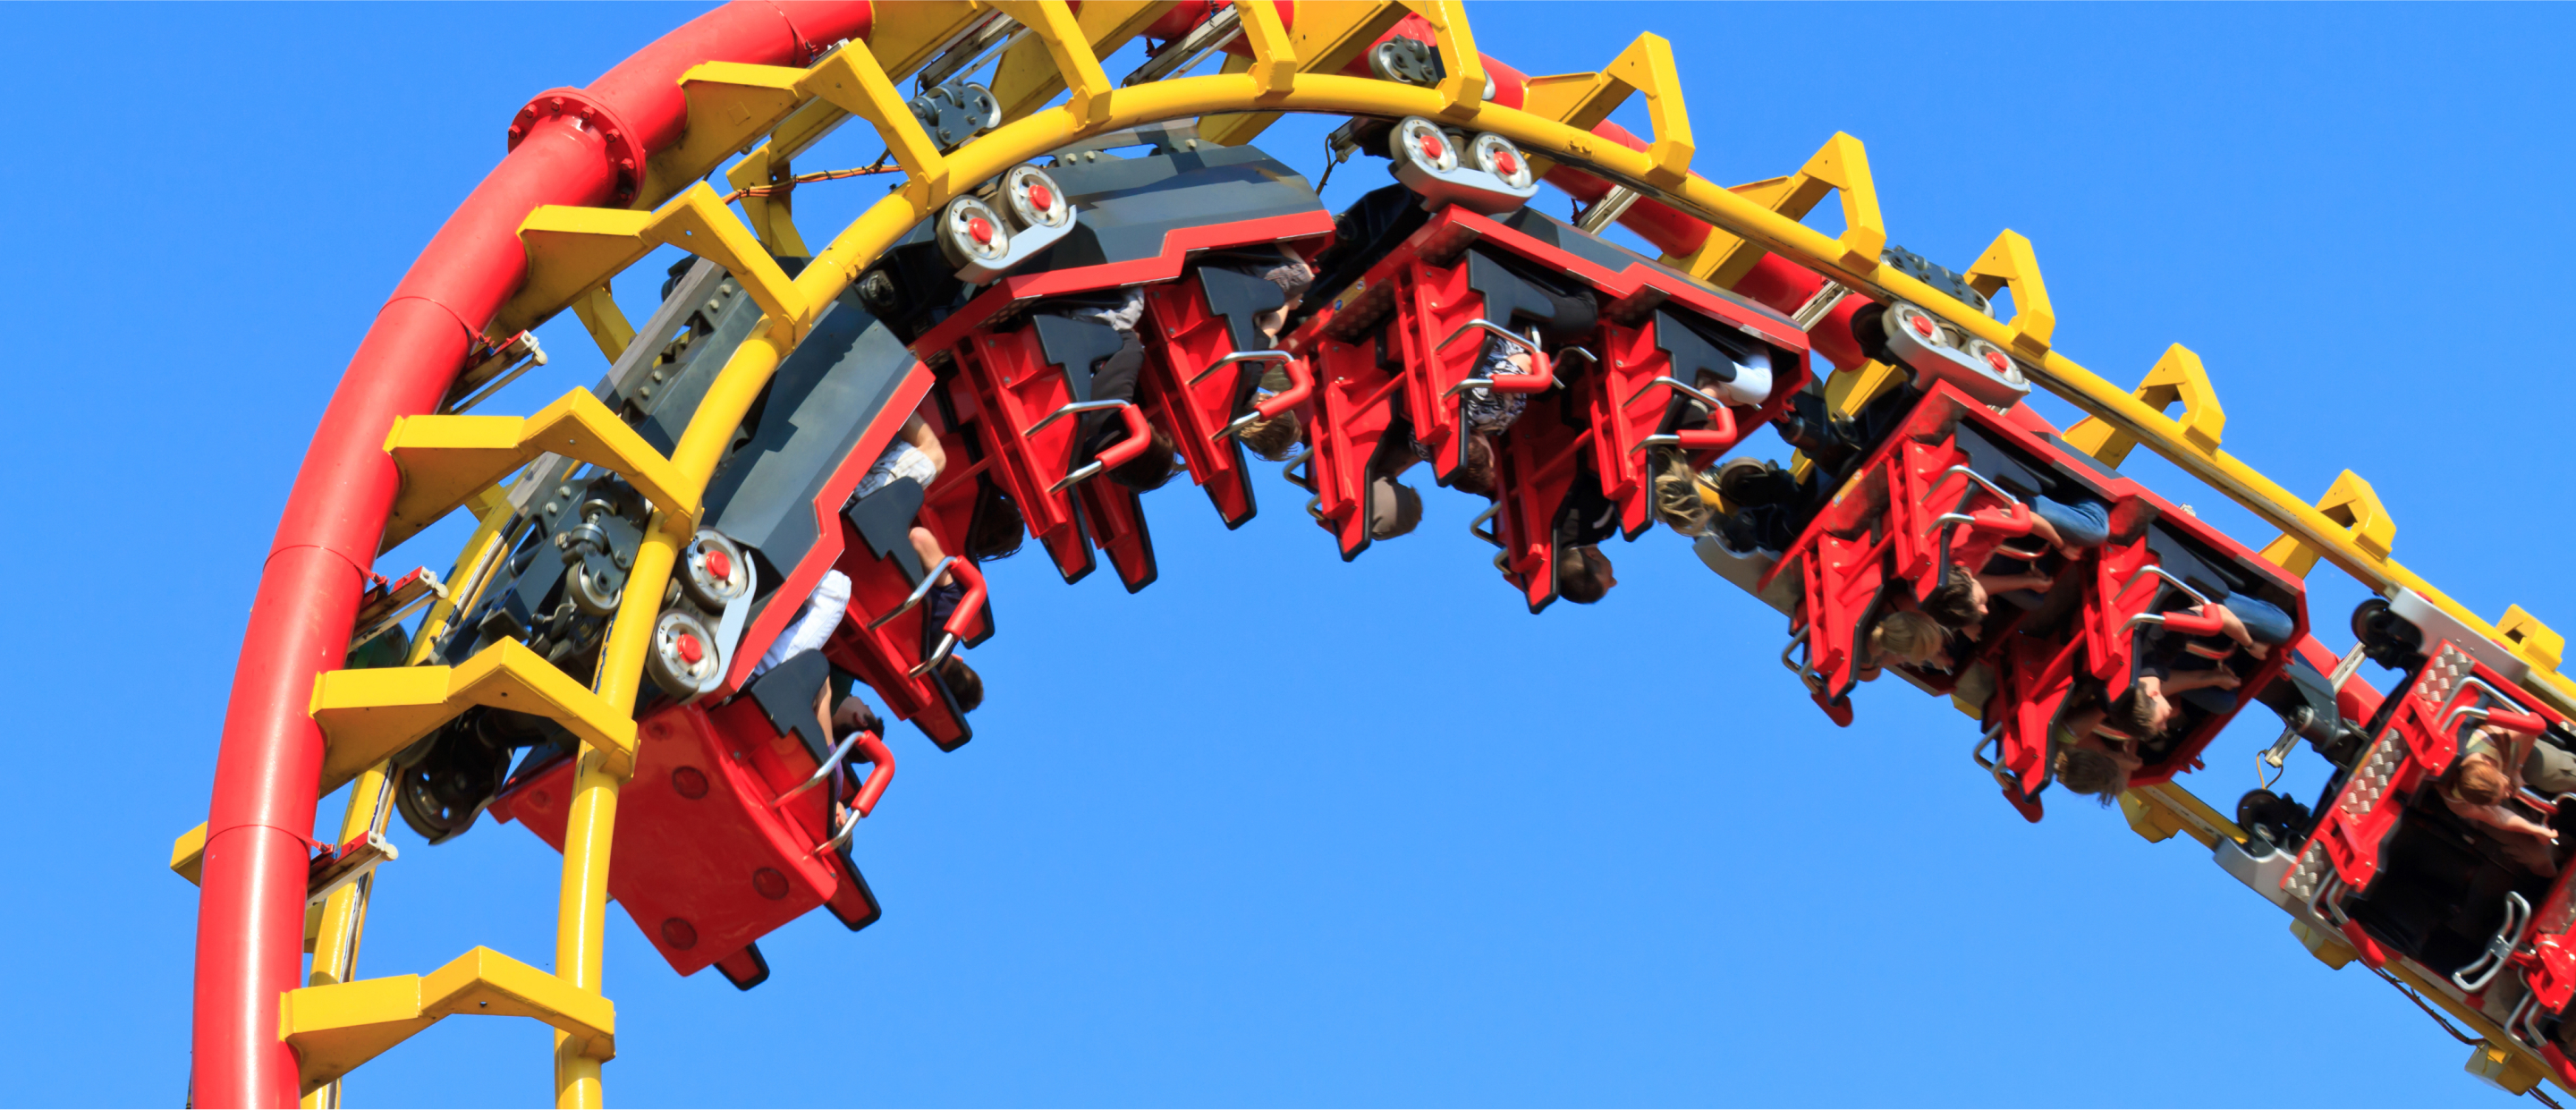 Photograph of people on a loop of a roller coaster